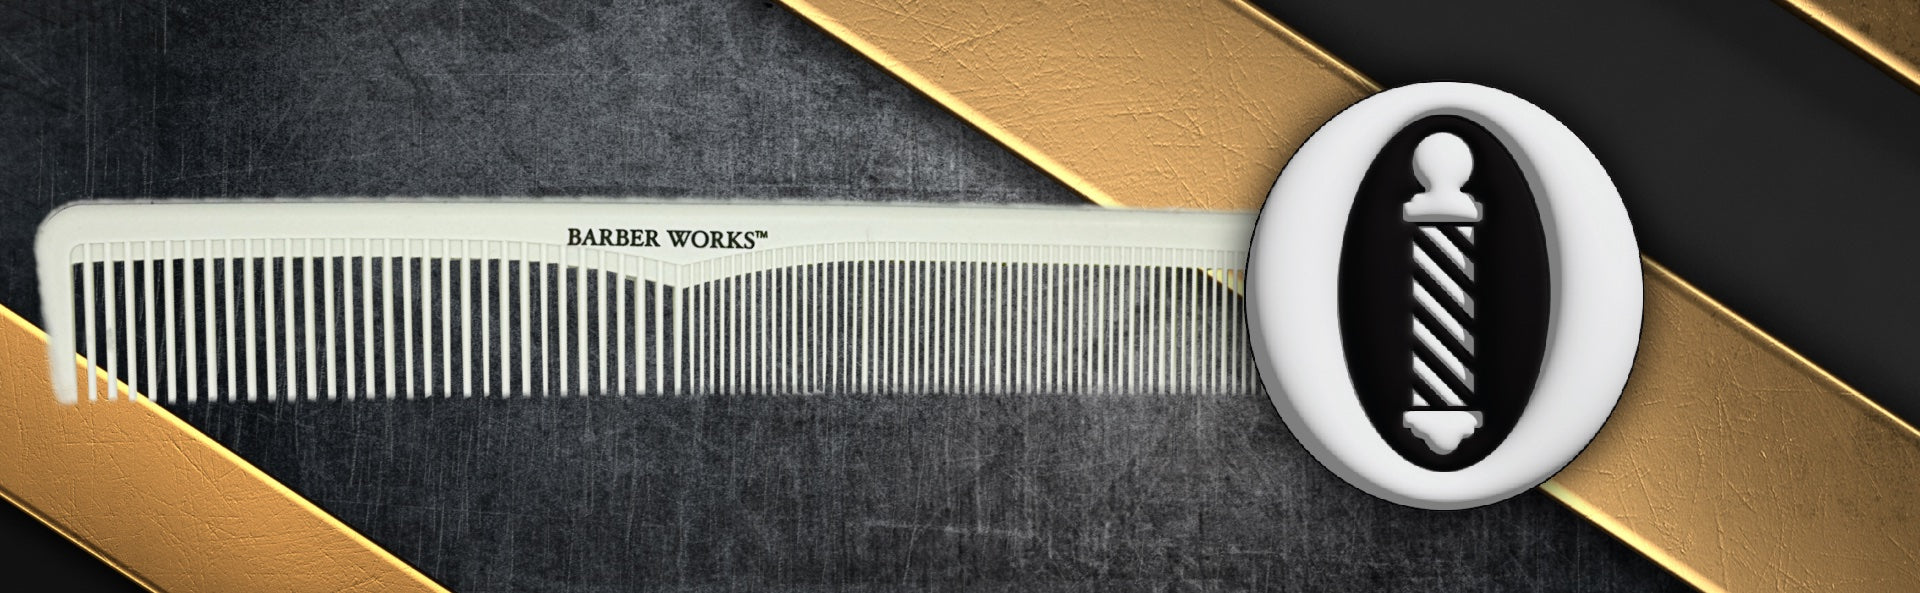 Professional Barber Works 7-inch Styling Comb made from hybrid ceramic and ABS plastic, designed for versatile hairstyling and superior durability.